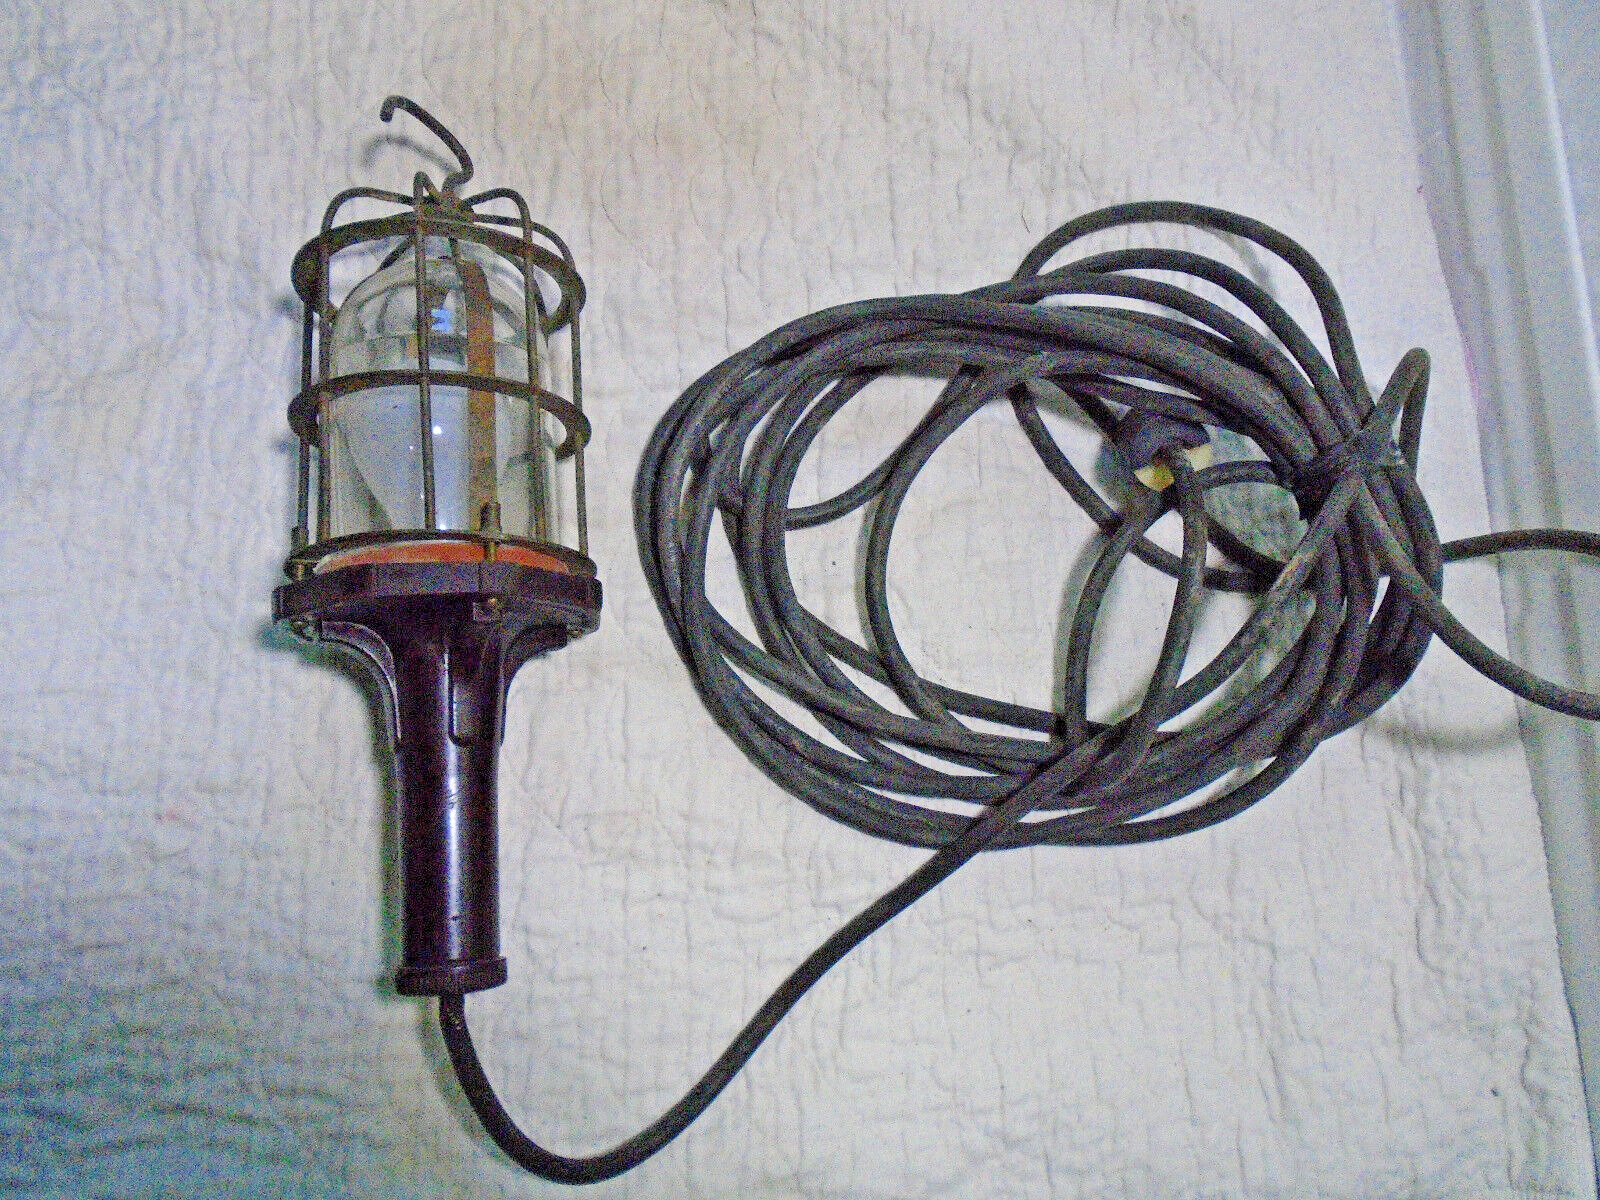 Vintage Industrial McGill Brass Caged Trouble Lamp Light Valpo IND. WORKS